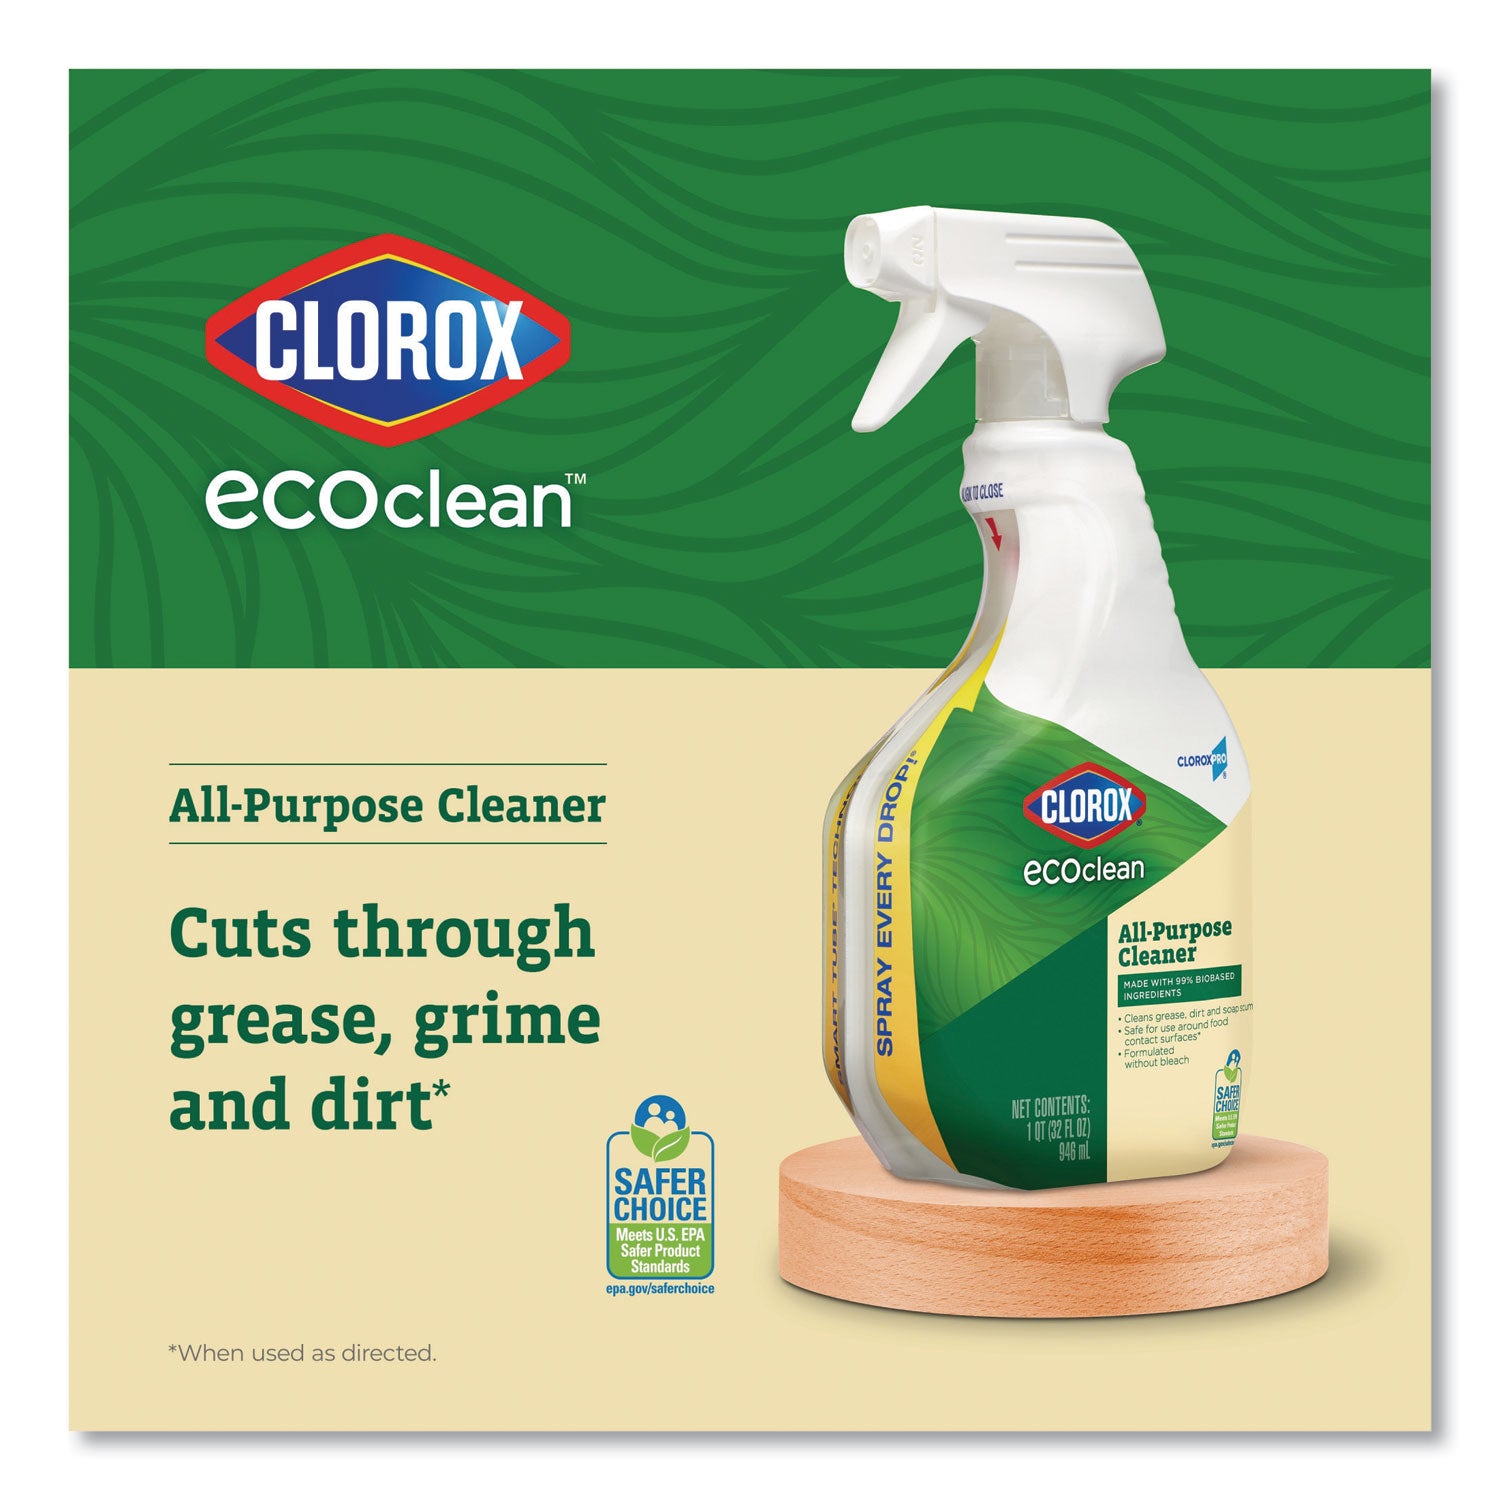 clorox-pro-ecoclean-all-purpose-cleaner-unscented-32-oz-spray-bottle-9-carton_clo60276ct - 6